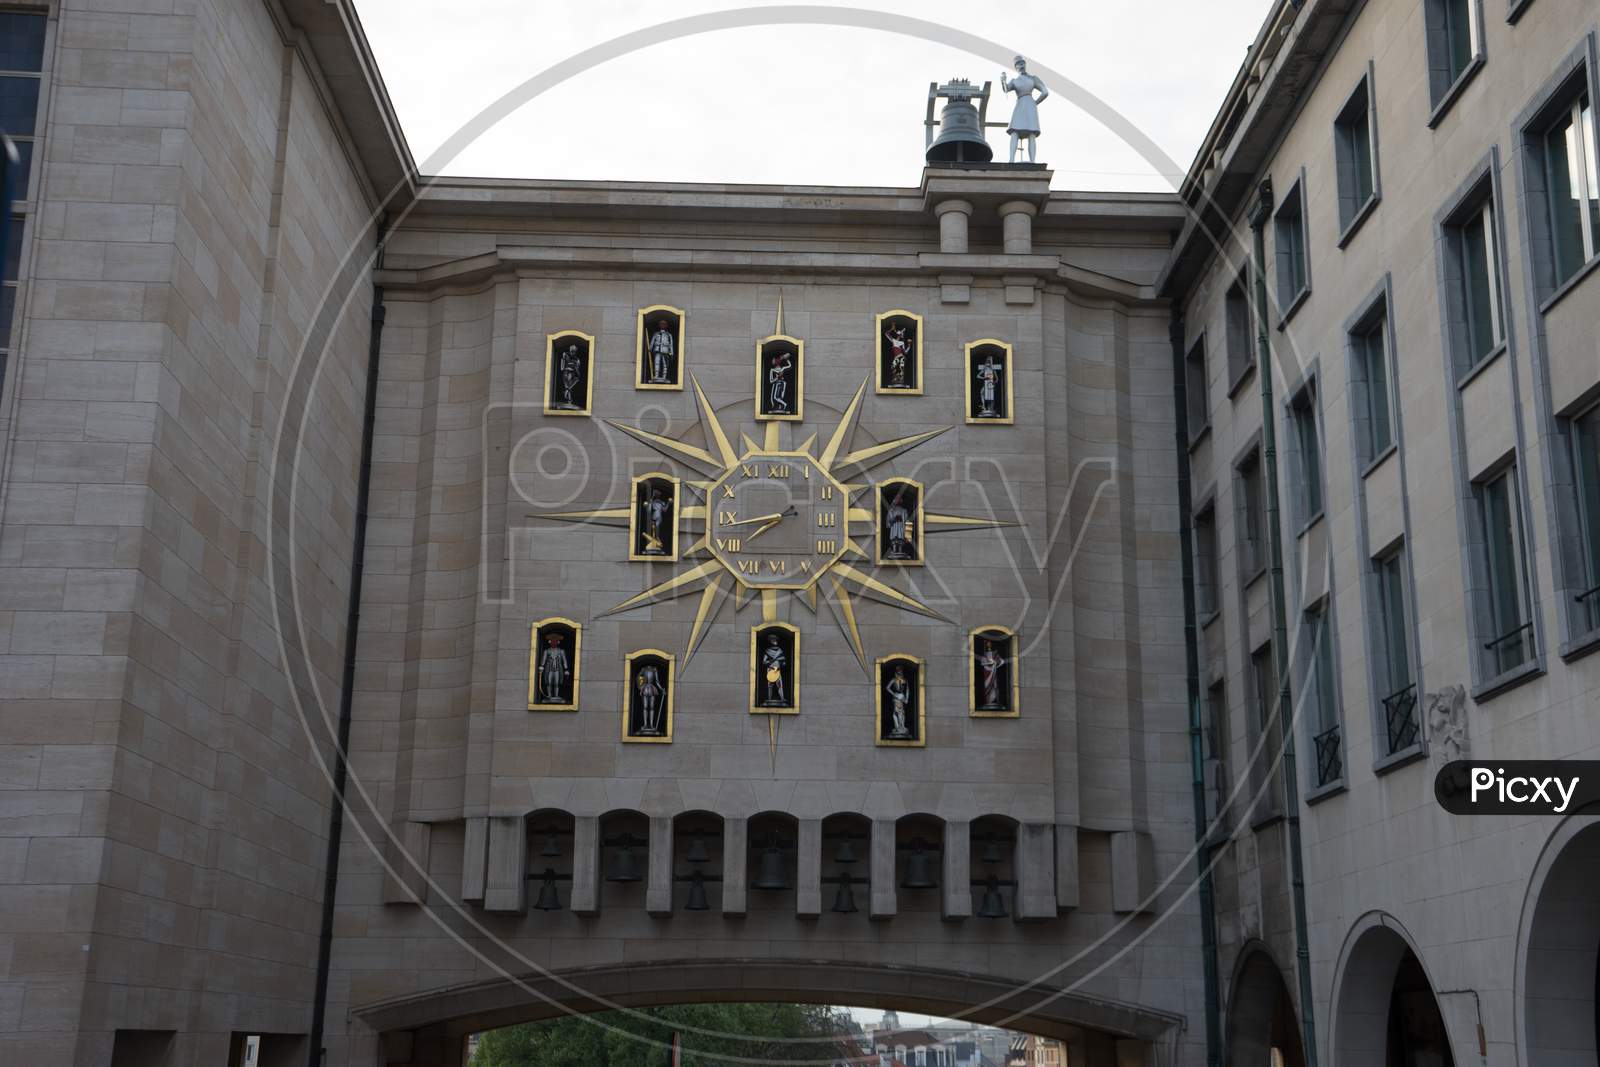 The Jacquemart And His Tenor Bell.A Clock With A Decoration Of Knights And A Bell On Top In Brussels